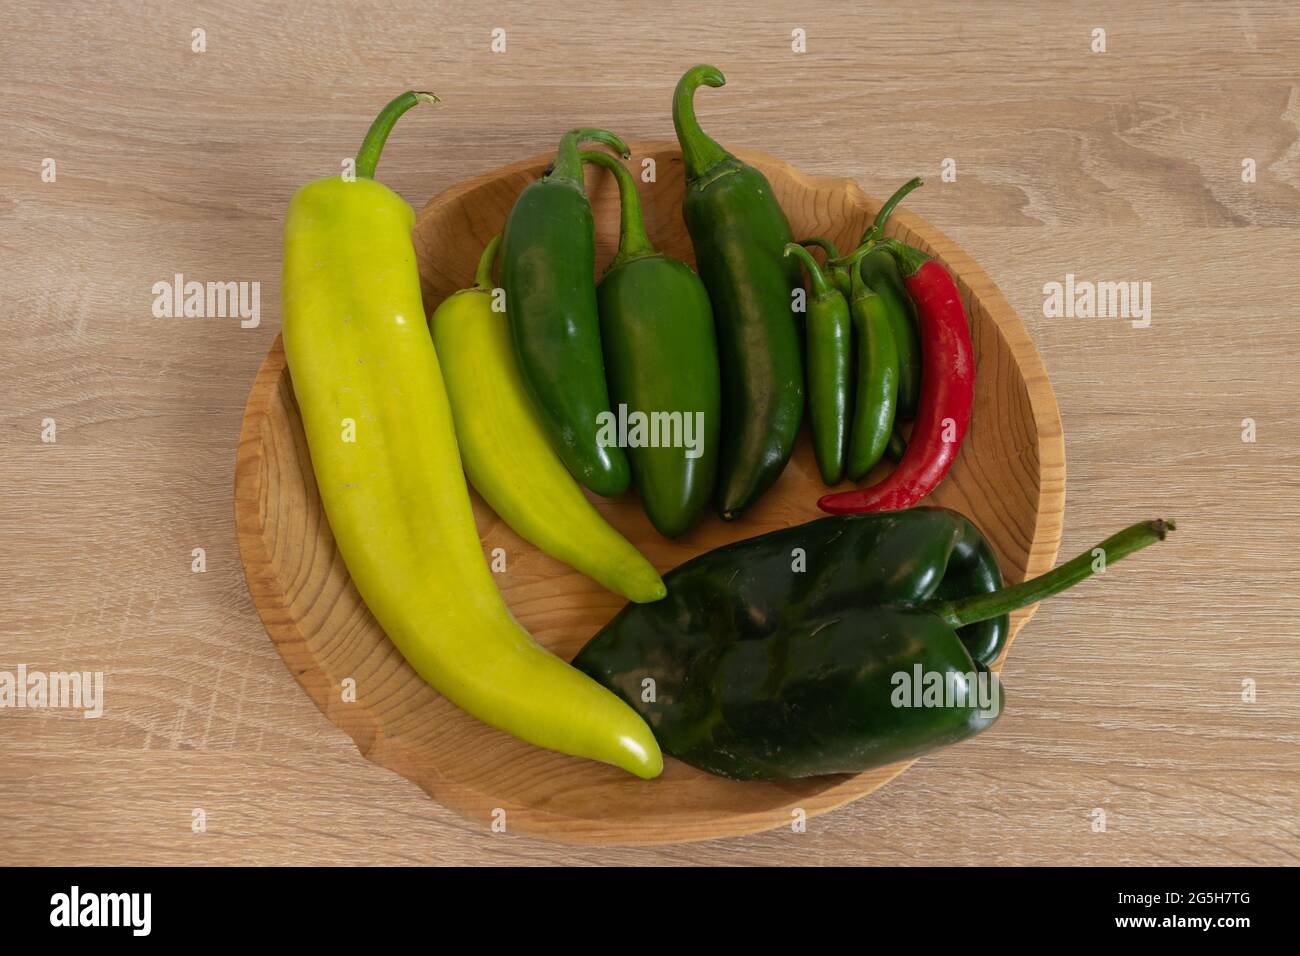 Wooden plate with mix of different peppers. Jalapeño, serrano, poblano, xcatik. Chiles frescos Stock Photo